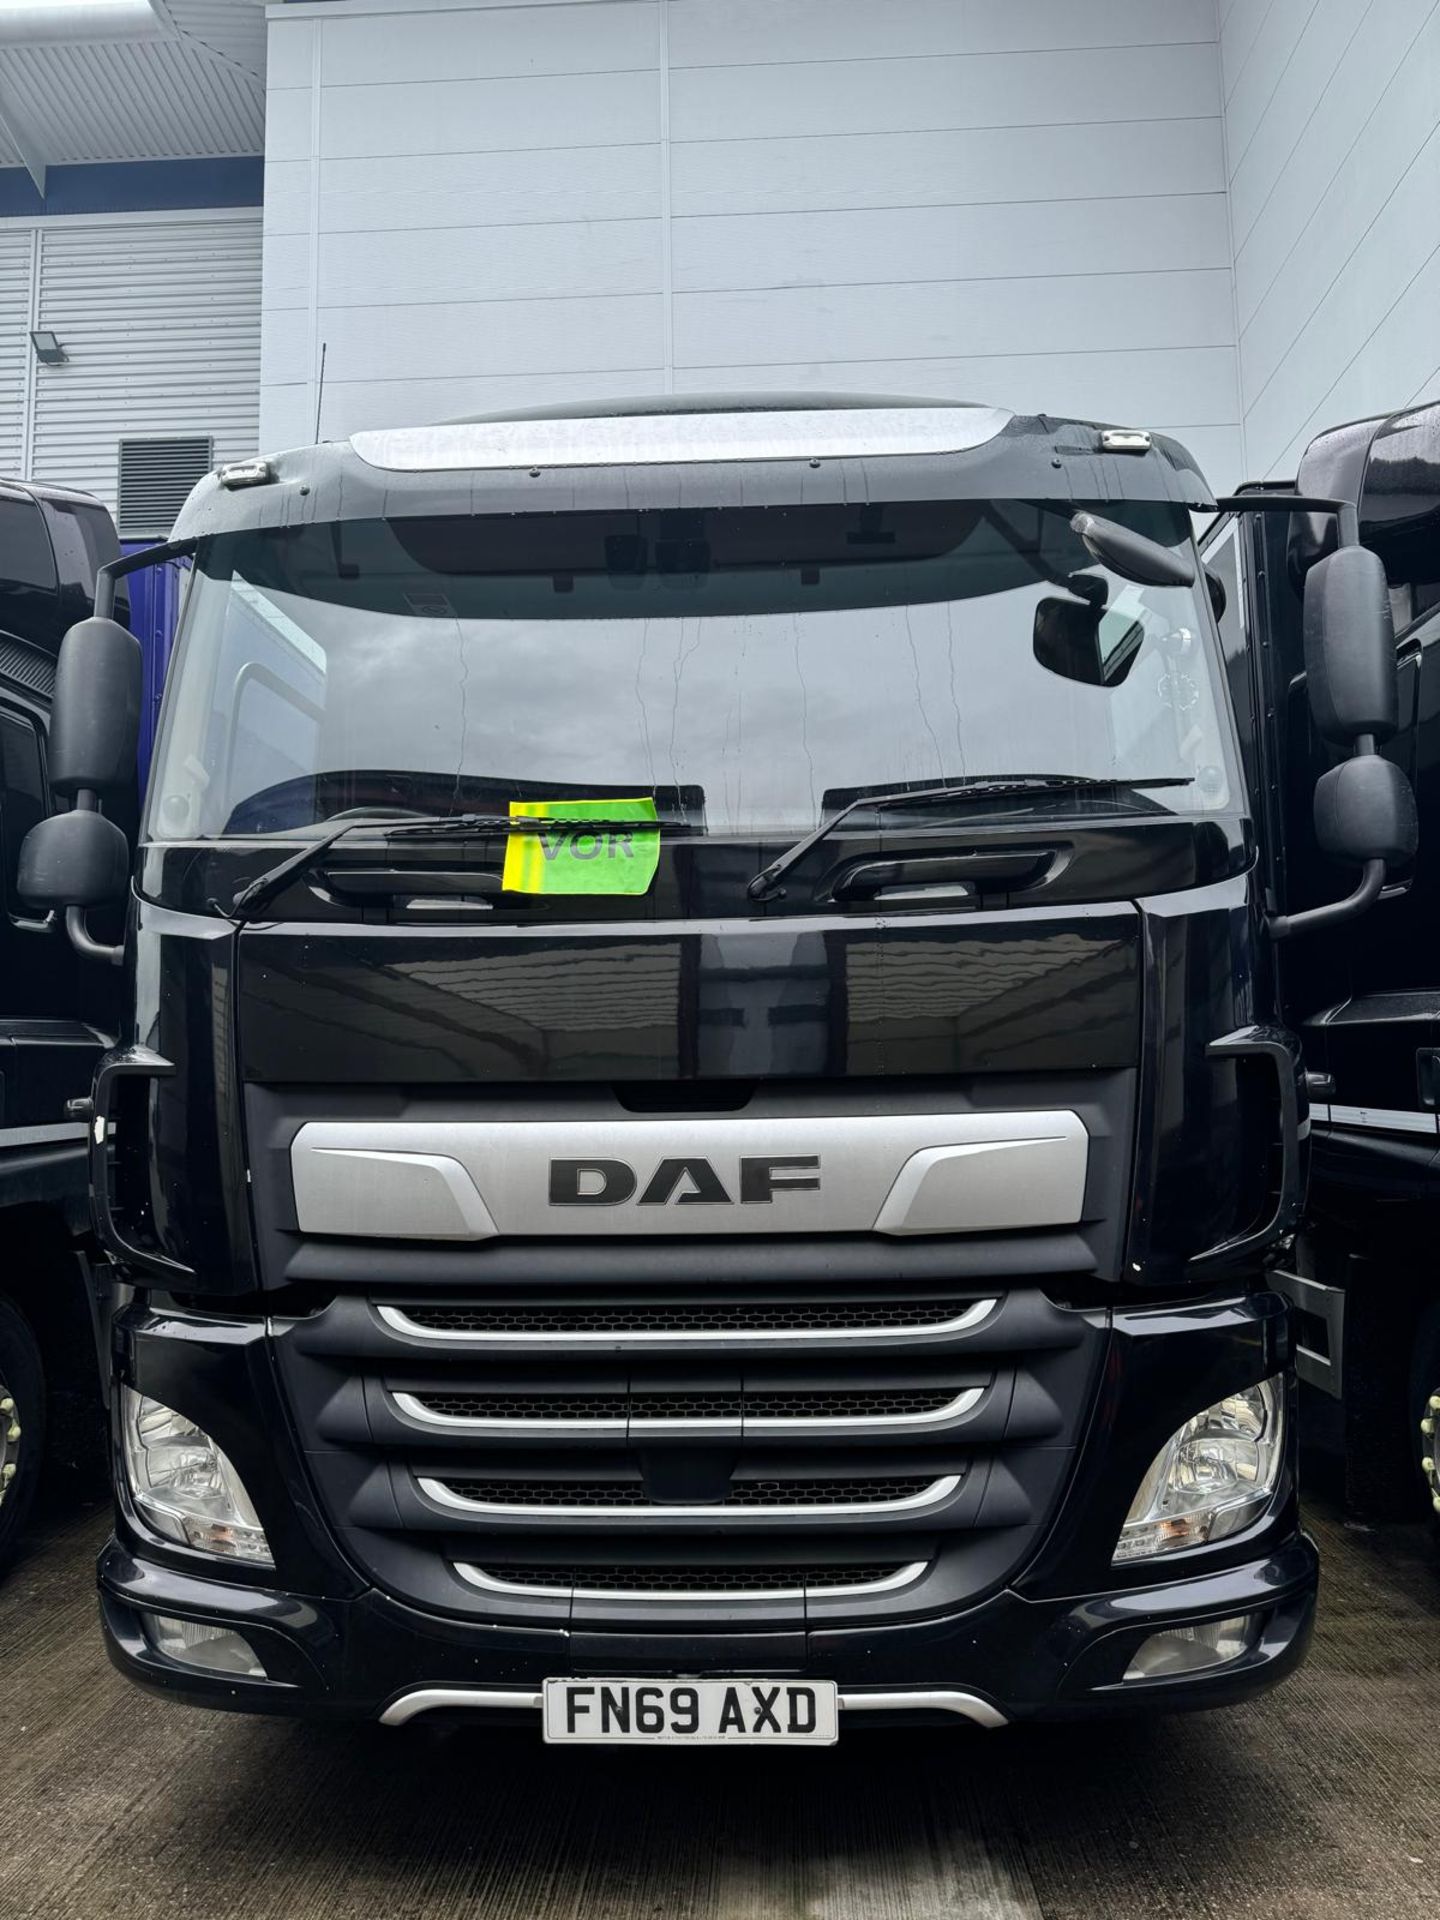 2019, DAF CF 260 FA (Ex-Fleet Owned & Maintained) - FN69 AXD (18 Ton Rigid Truck with Tail Lift) - Image 3 of 20